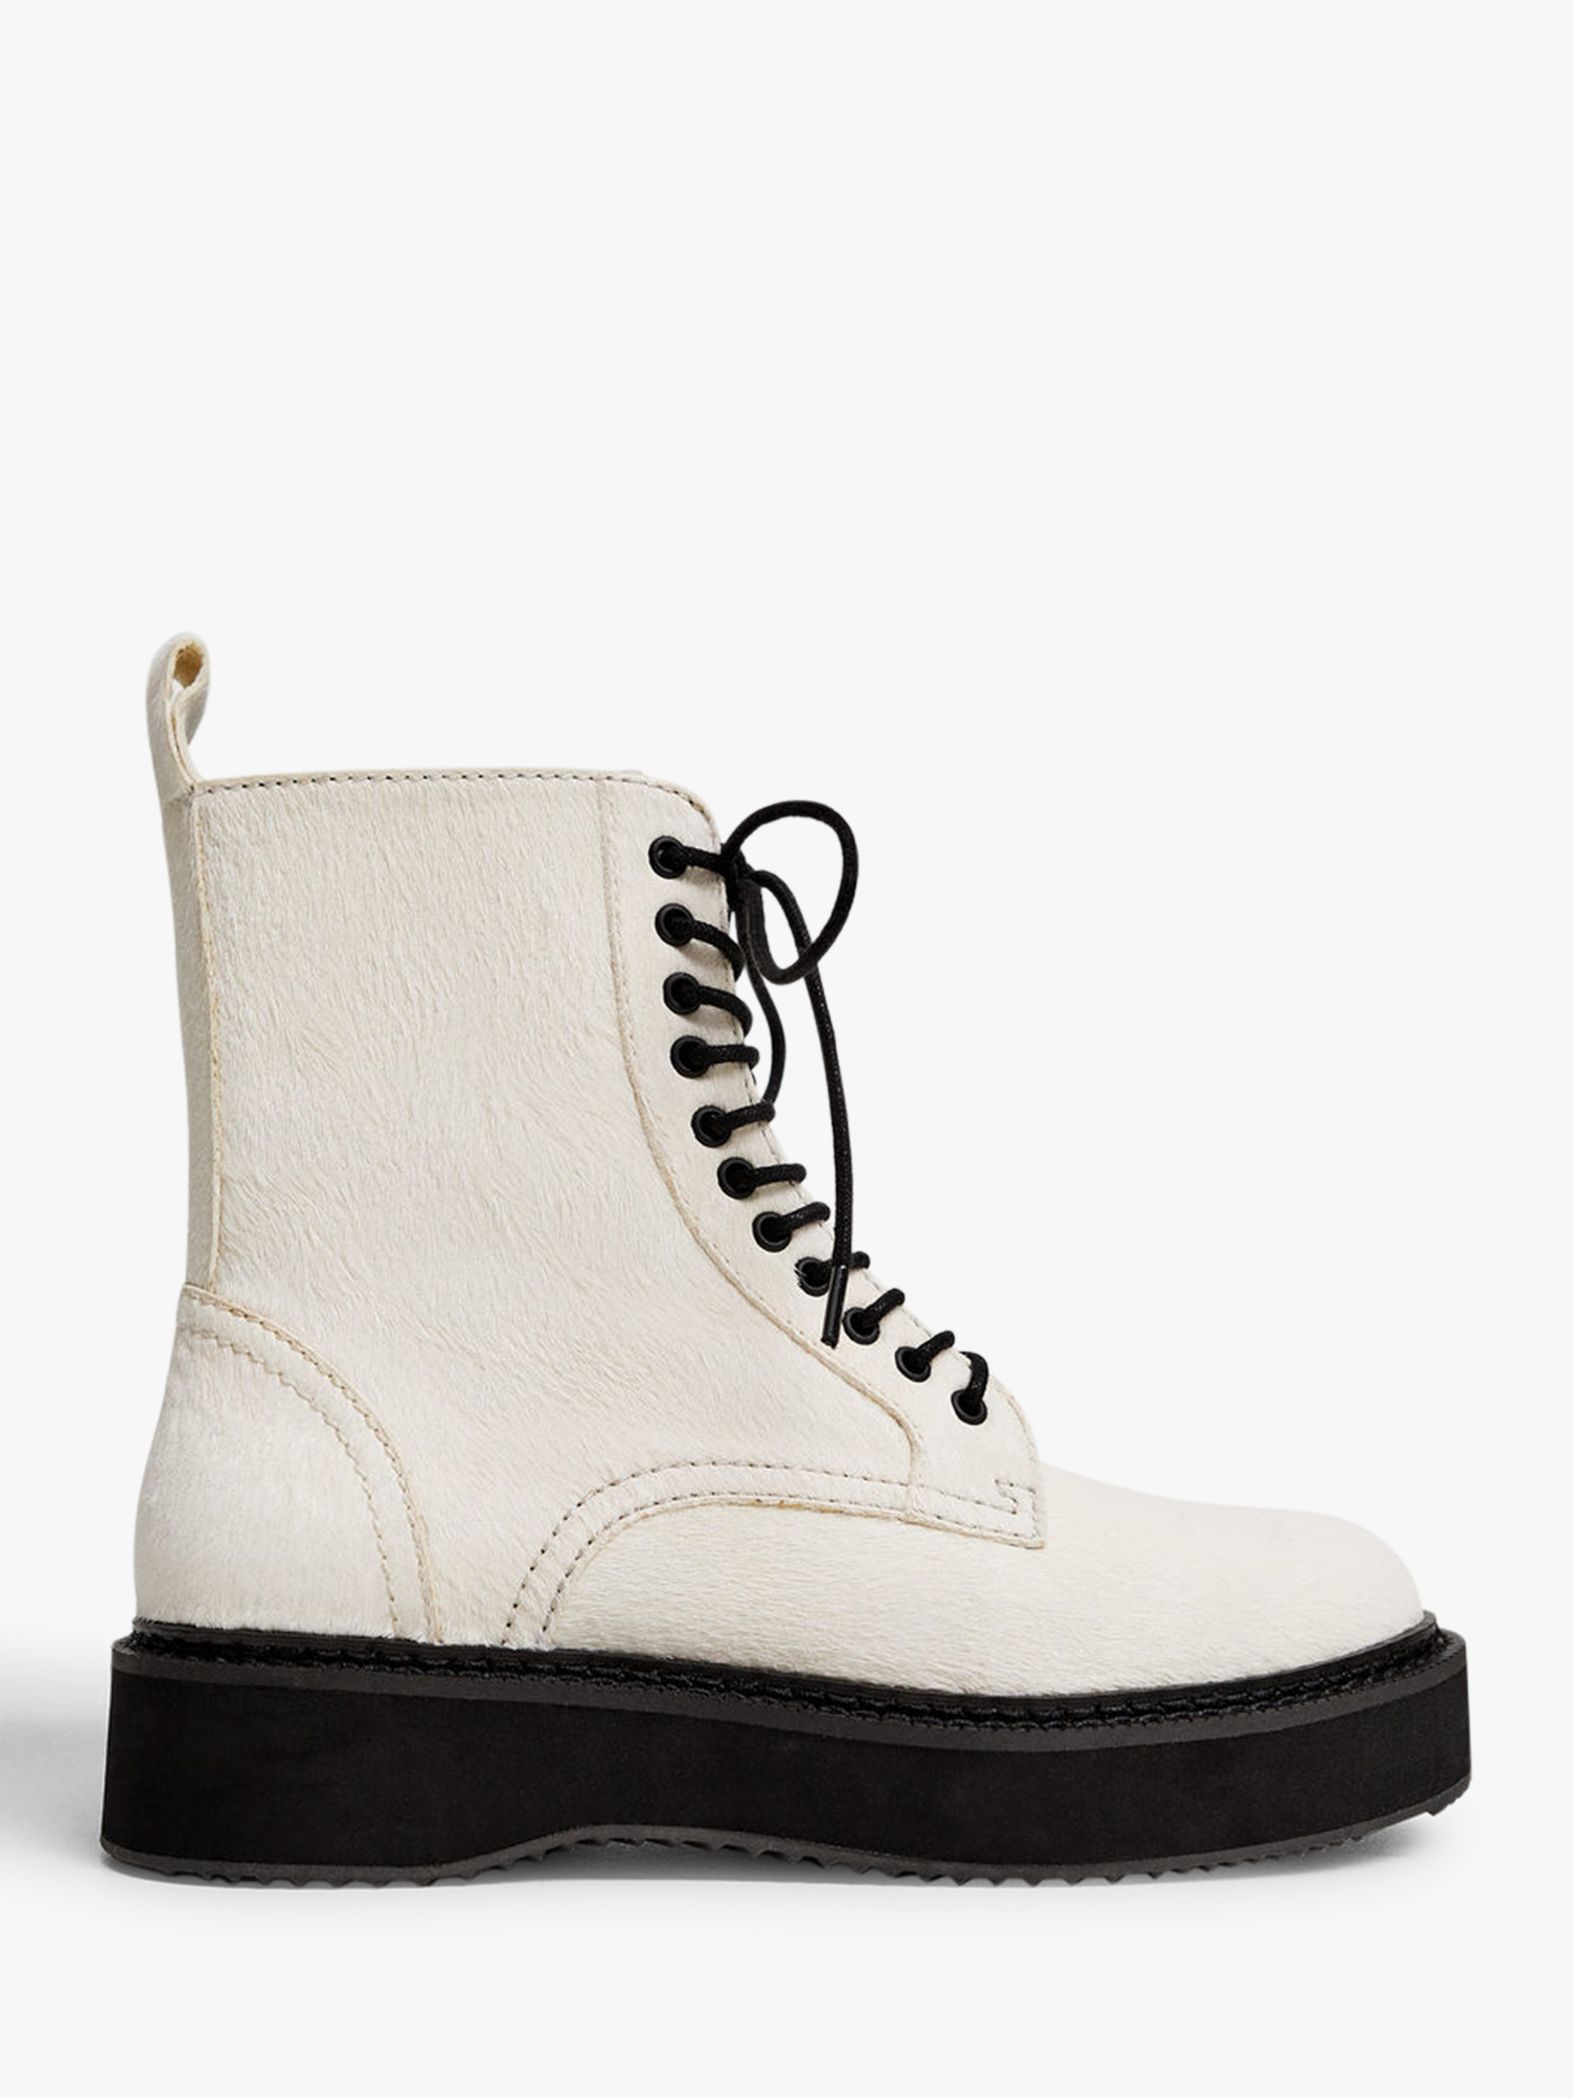 Mango Lace Up Leather Ankle Boots, White